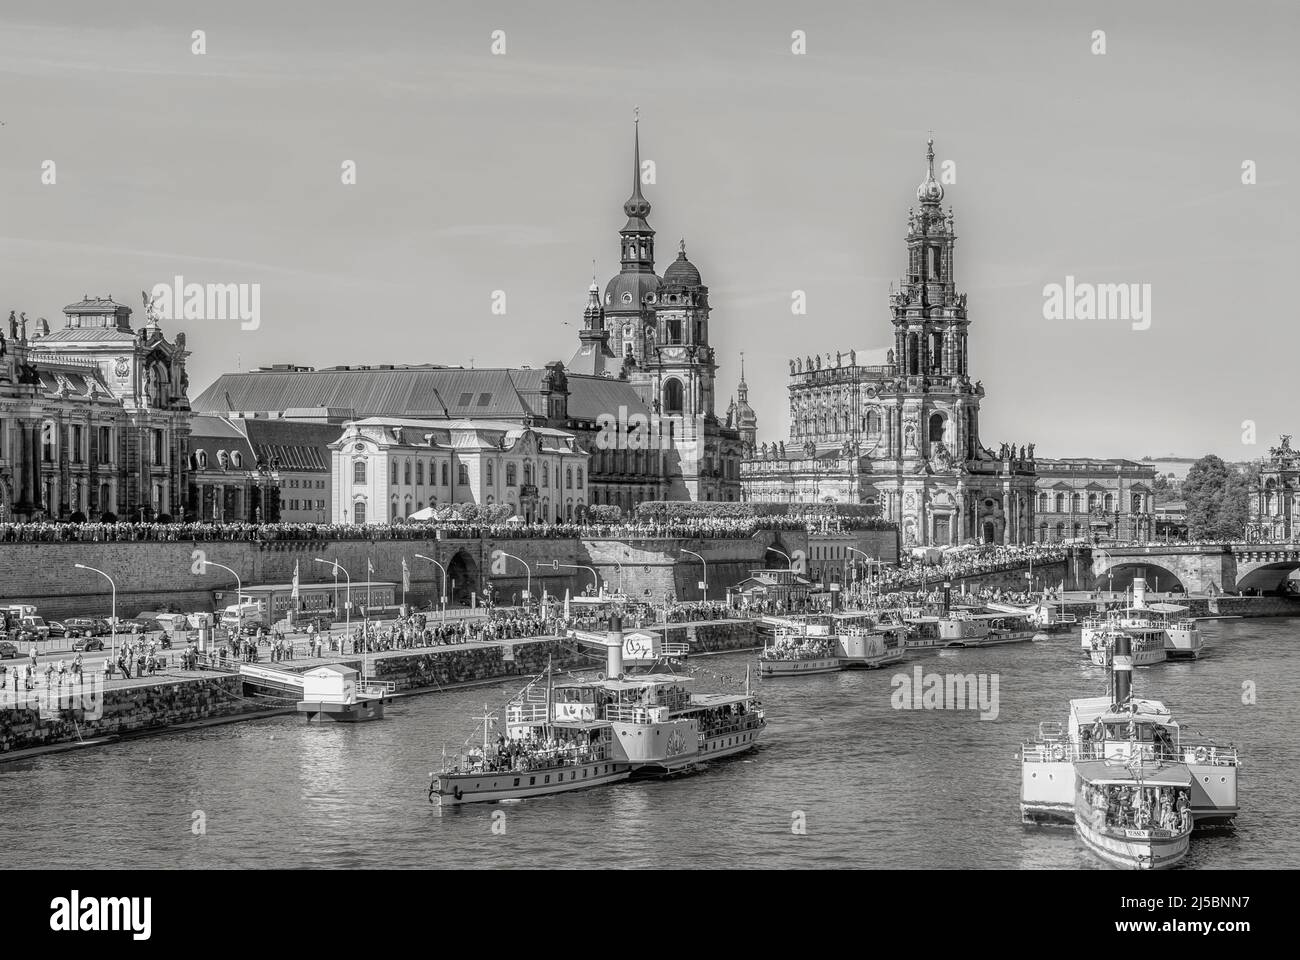 Black and White image of the annual steam ship parade on Elbe River, Dresden, Saxony, Germany Stock Photo